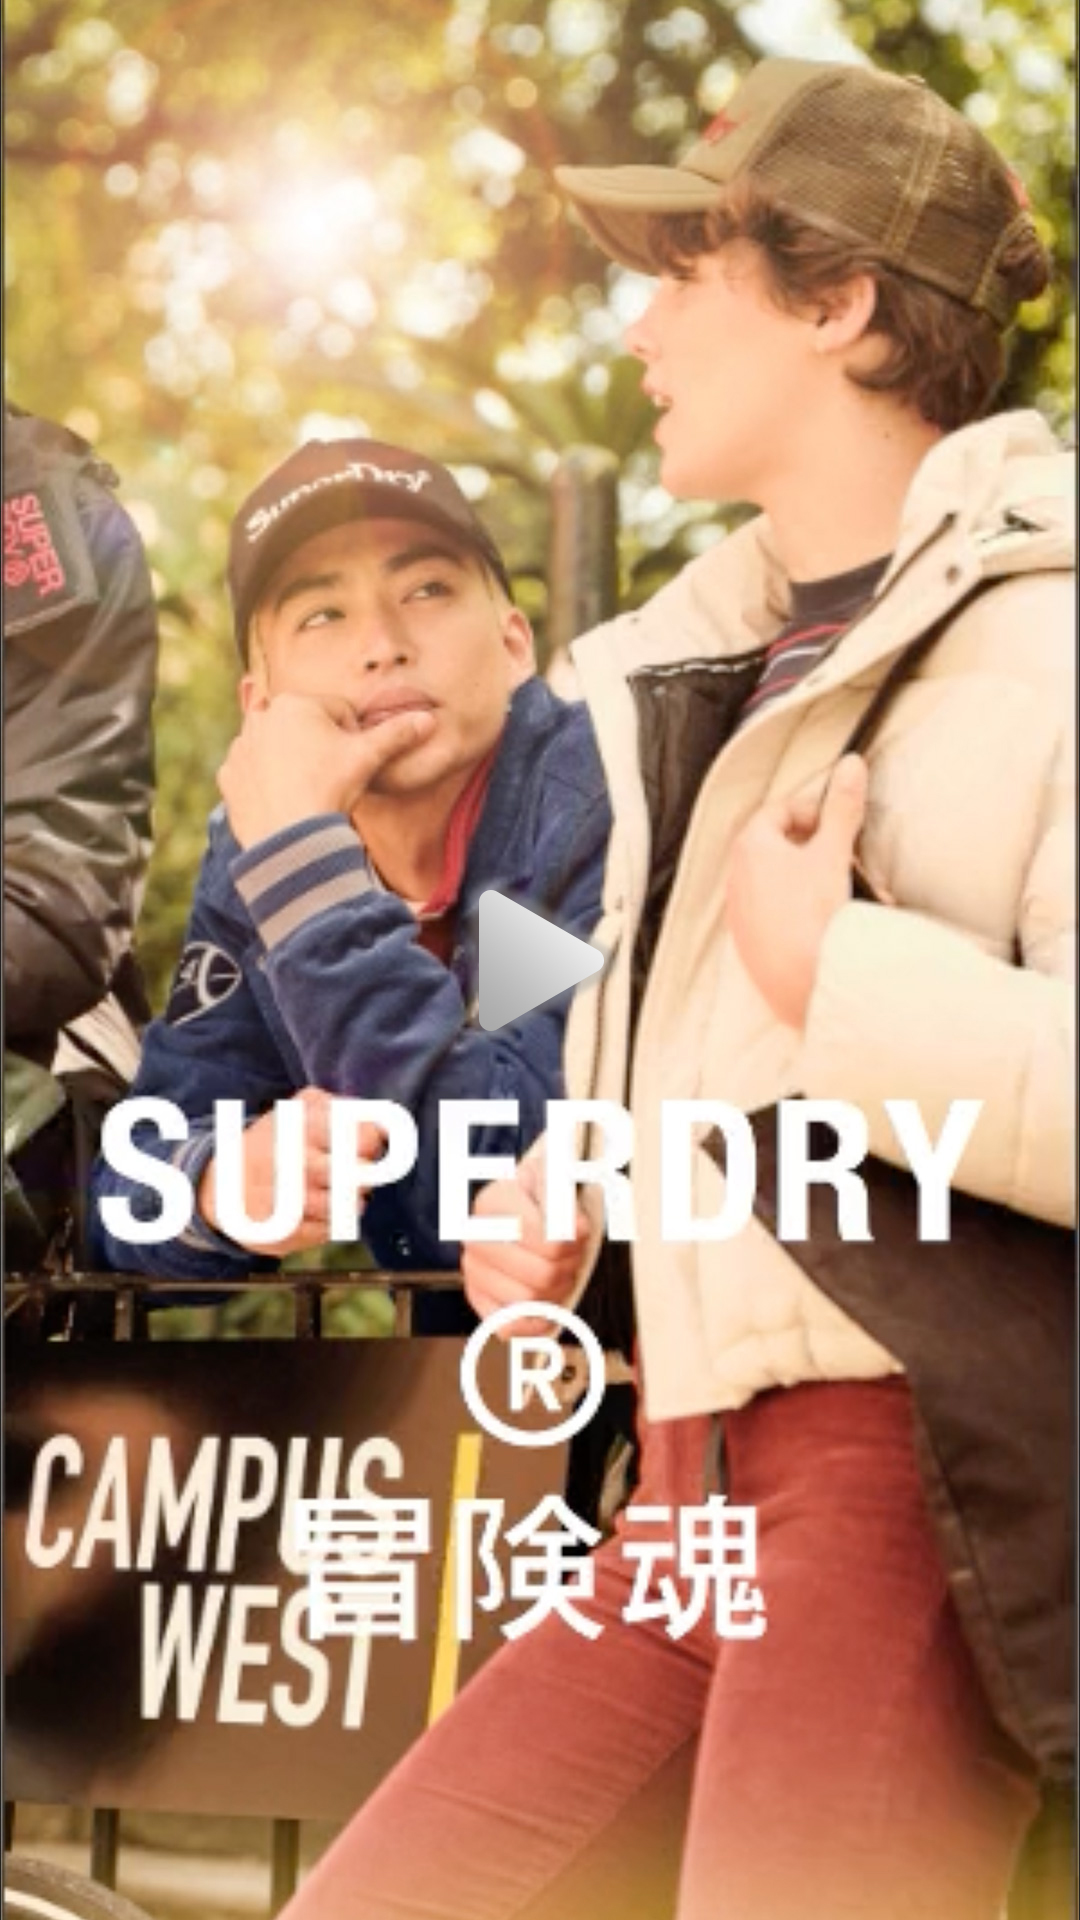 Moving image of a group of young people hanging out wearing Superdry jackets